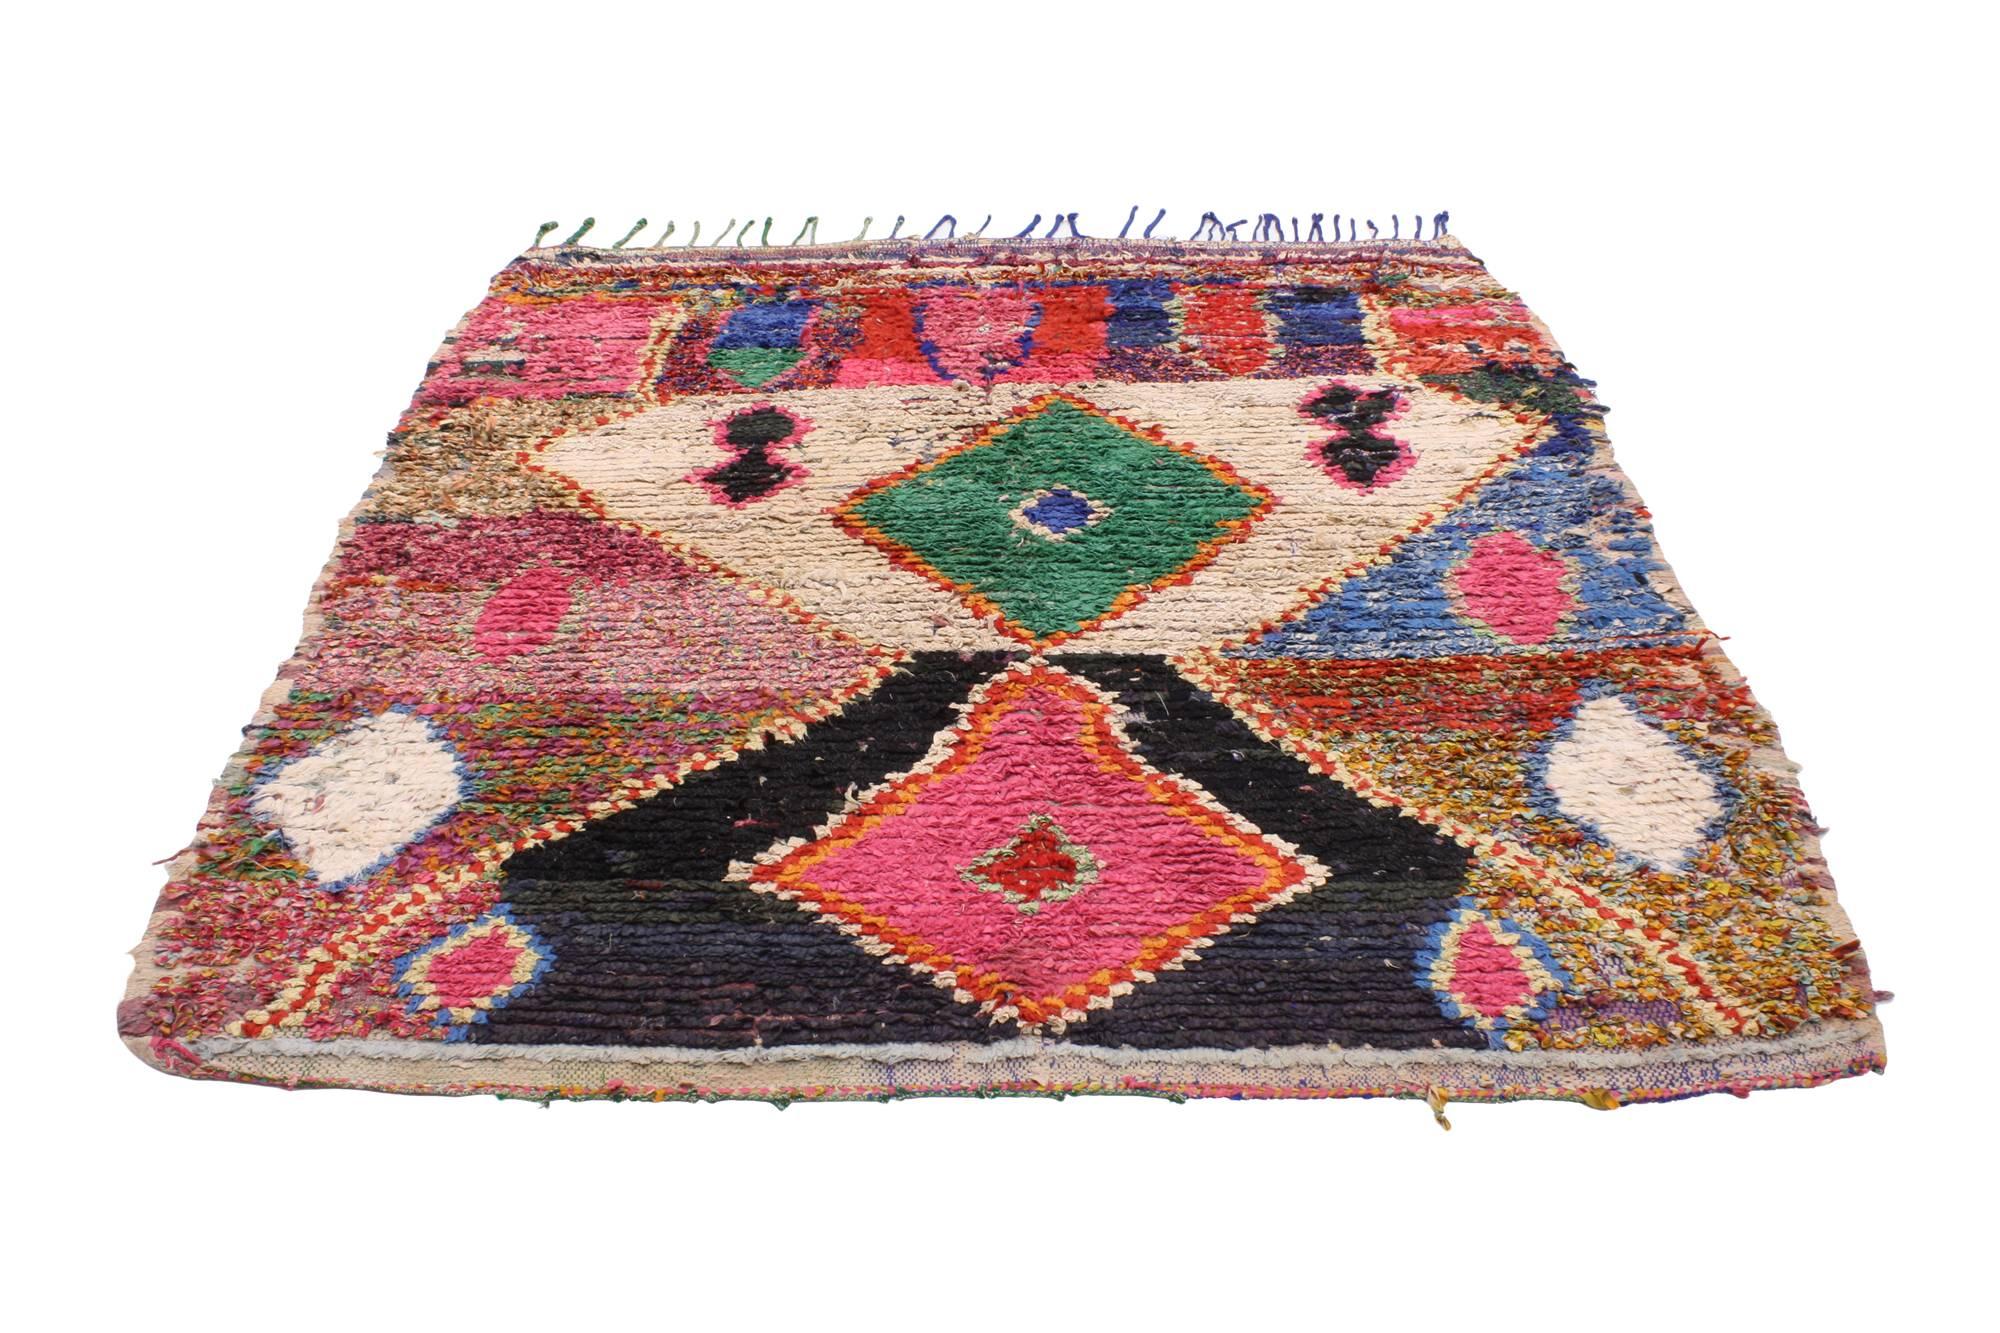 20477, vintage Berber Moroccan Boucherouite rug. Vivacious shades of the colors woven into this Moroccan rug work together to create a truly vibrant and life-giving feel. The vibrant colors and primitive charm conjures the tribal feeling of Moroccan